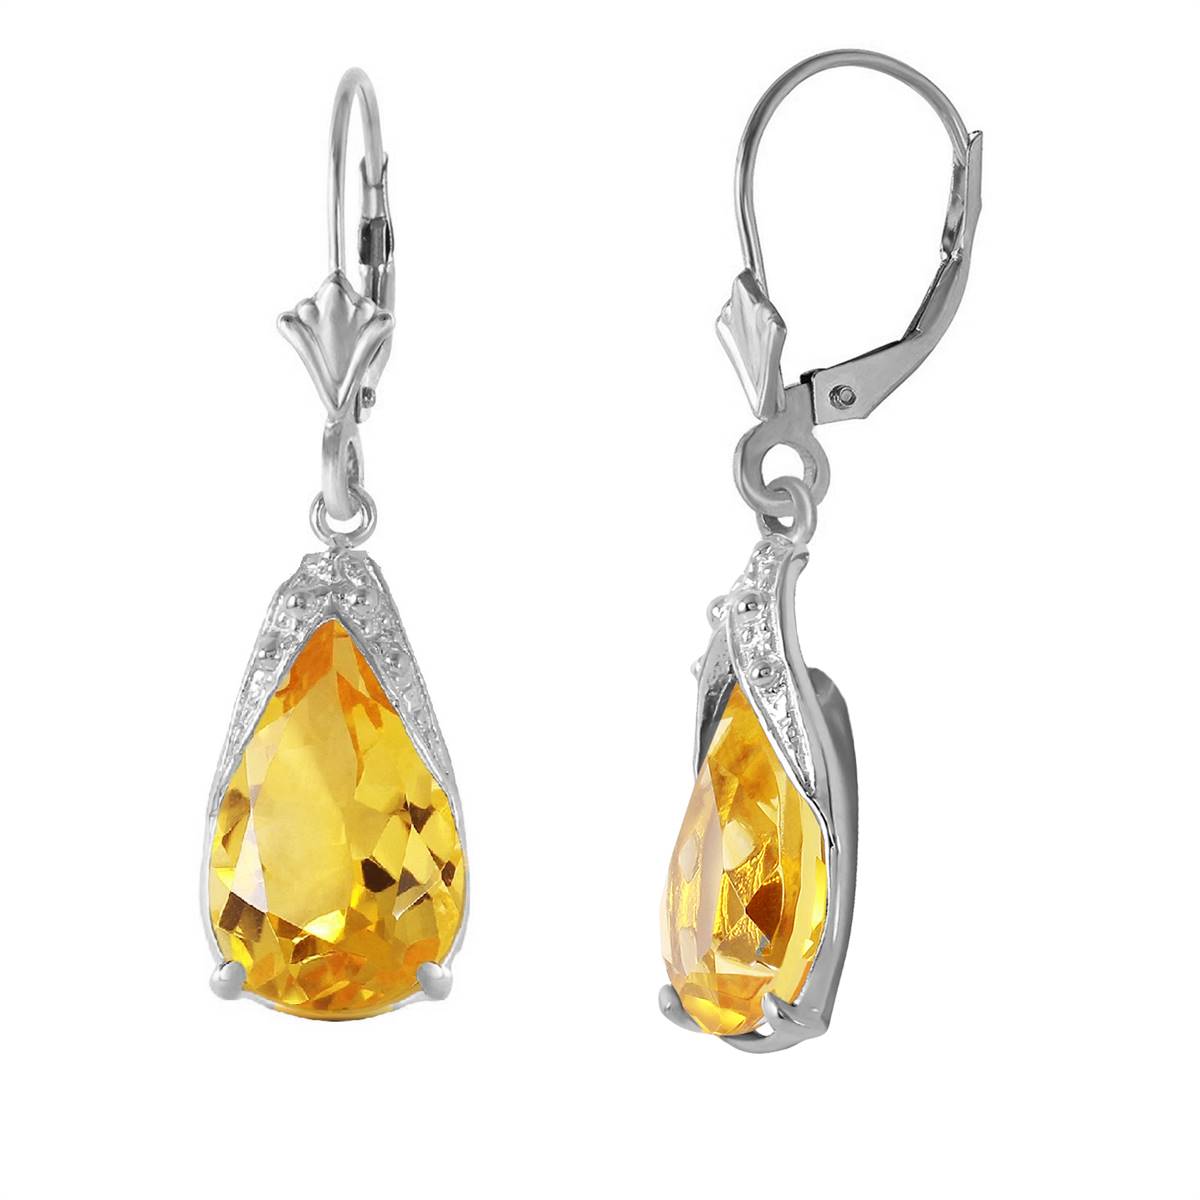 10 Carat 14K Solid White Gold Leverback Earrings Natural Citrine